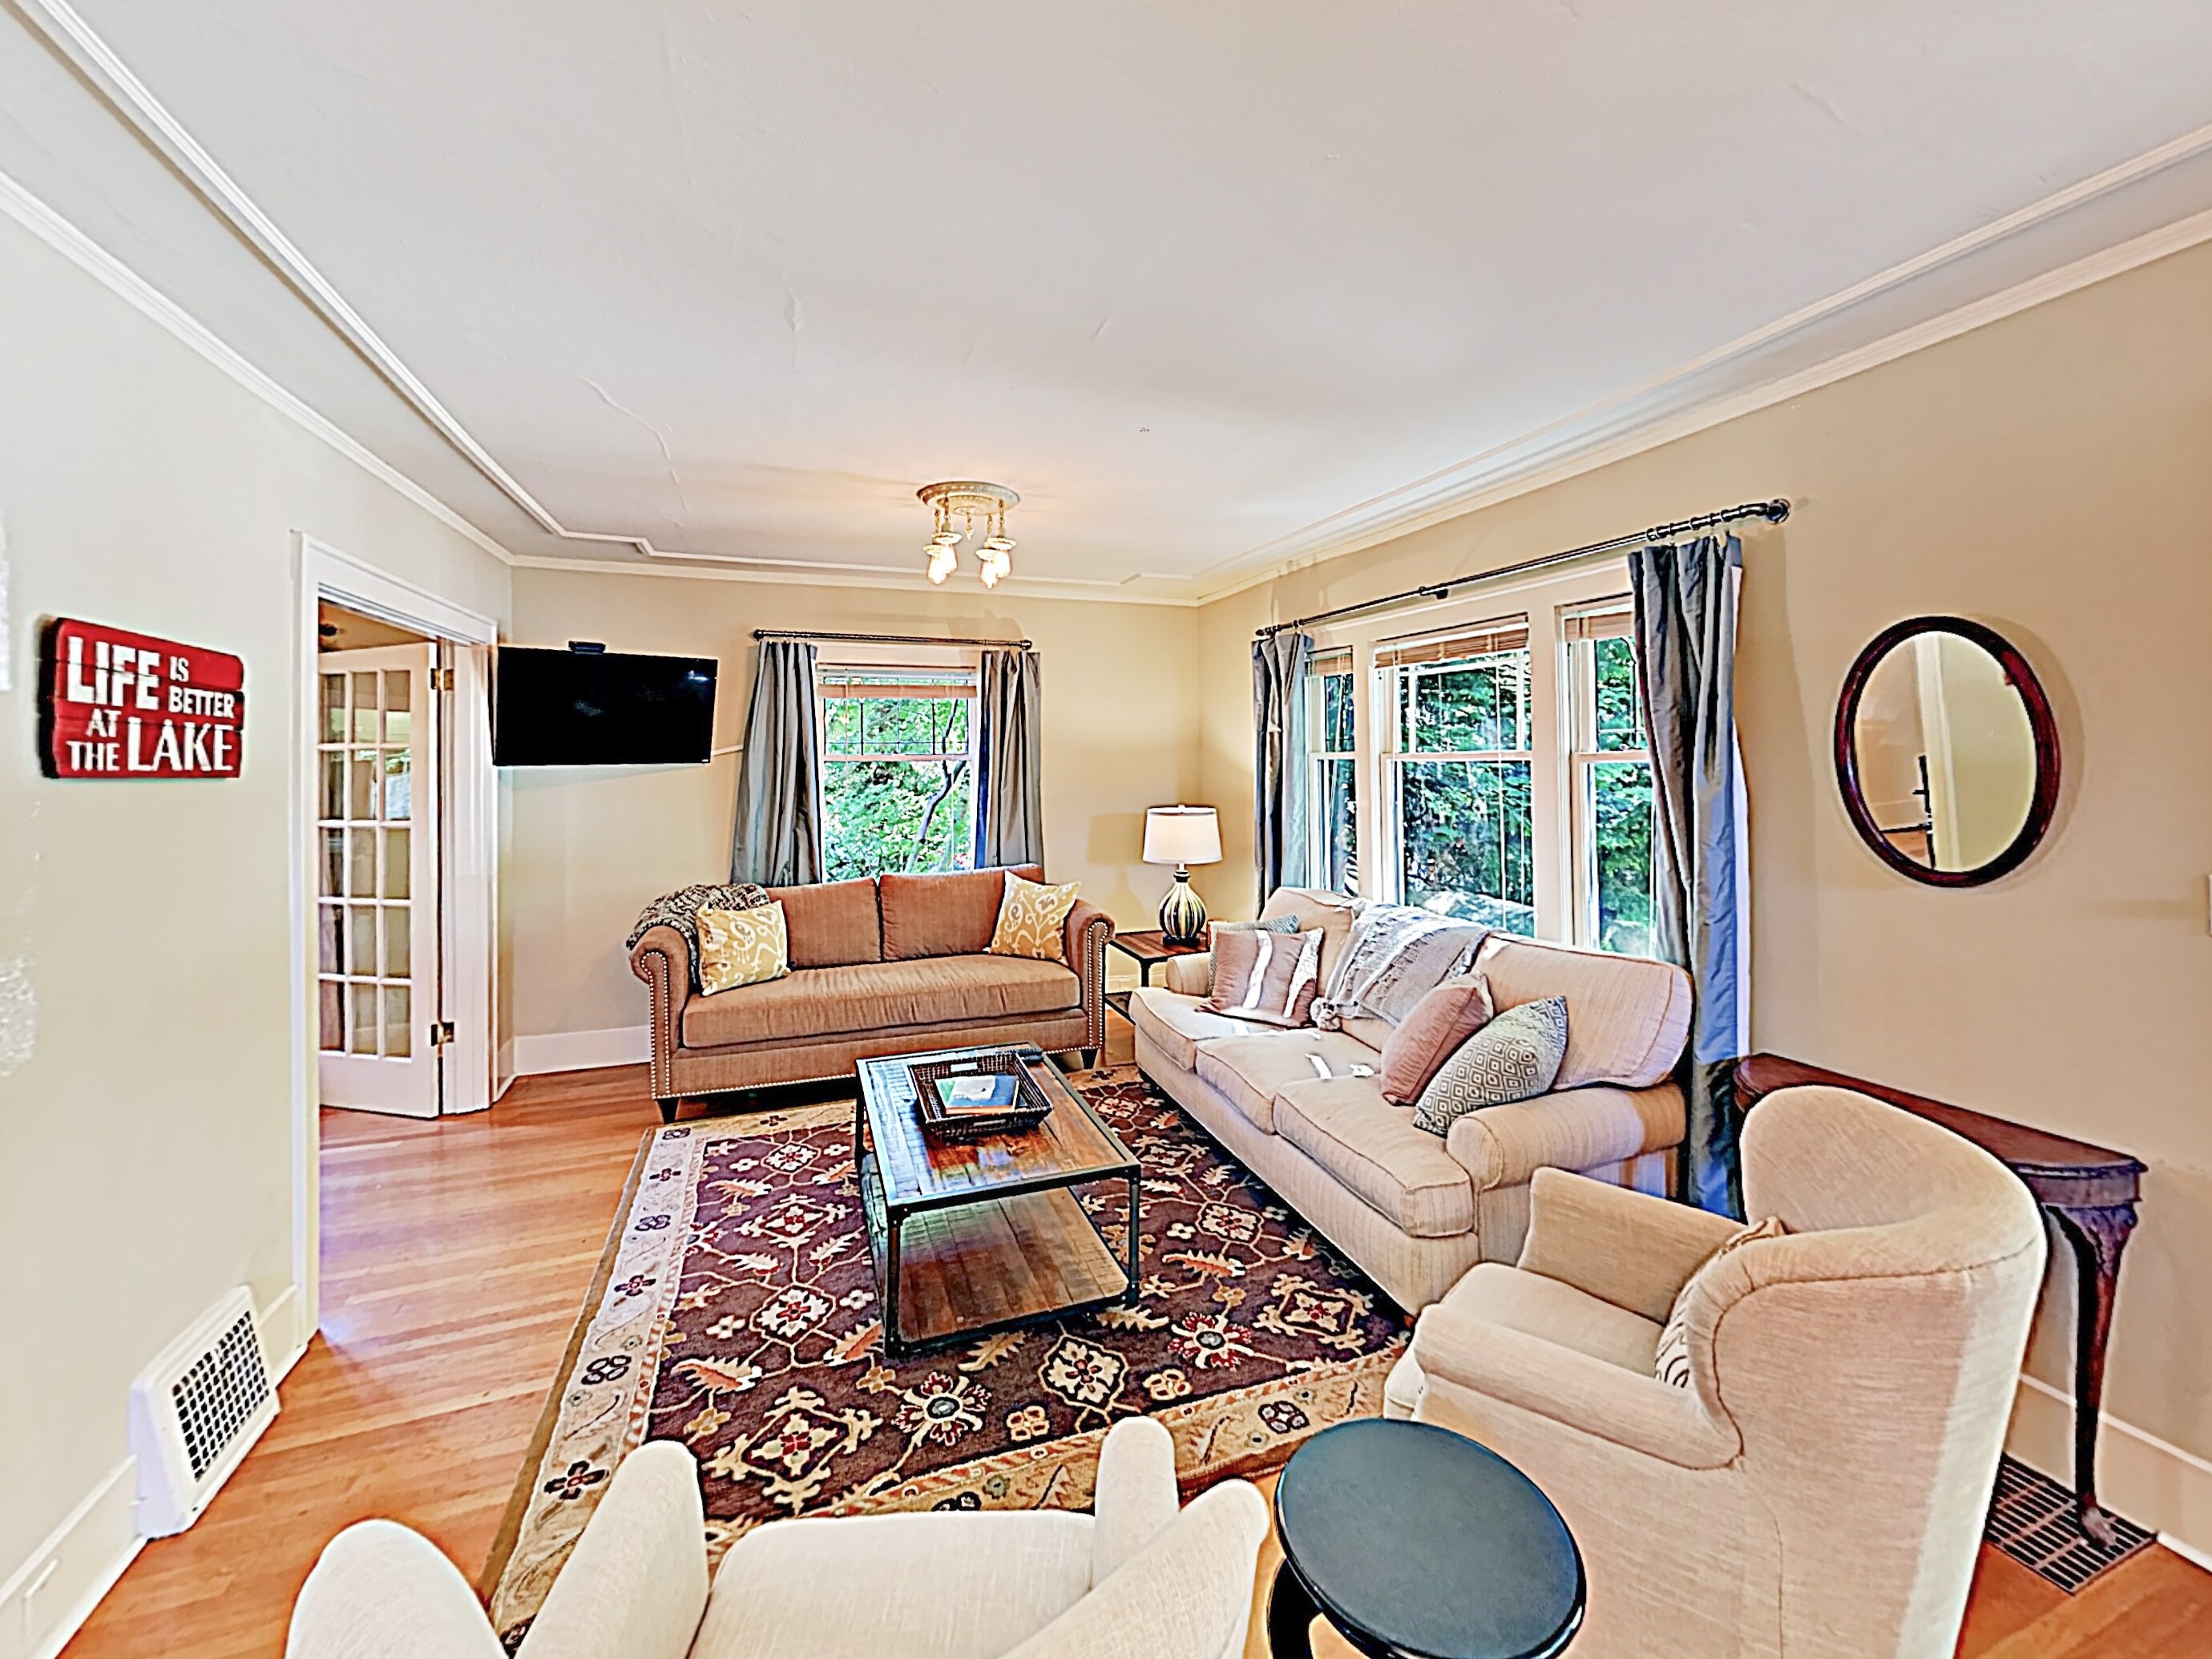 Welcome to Seattle! This home is professionally managed by TurnKey Vacation Rentals.